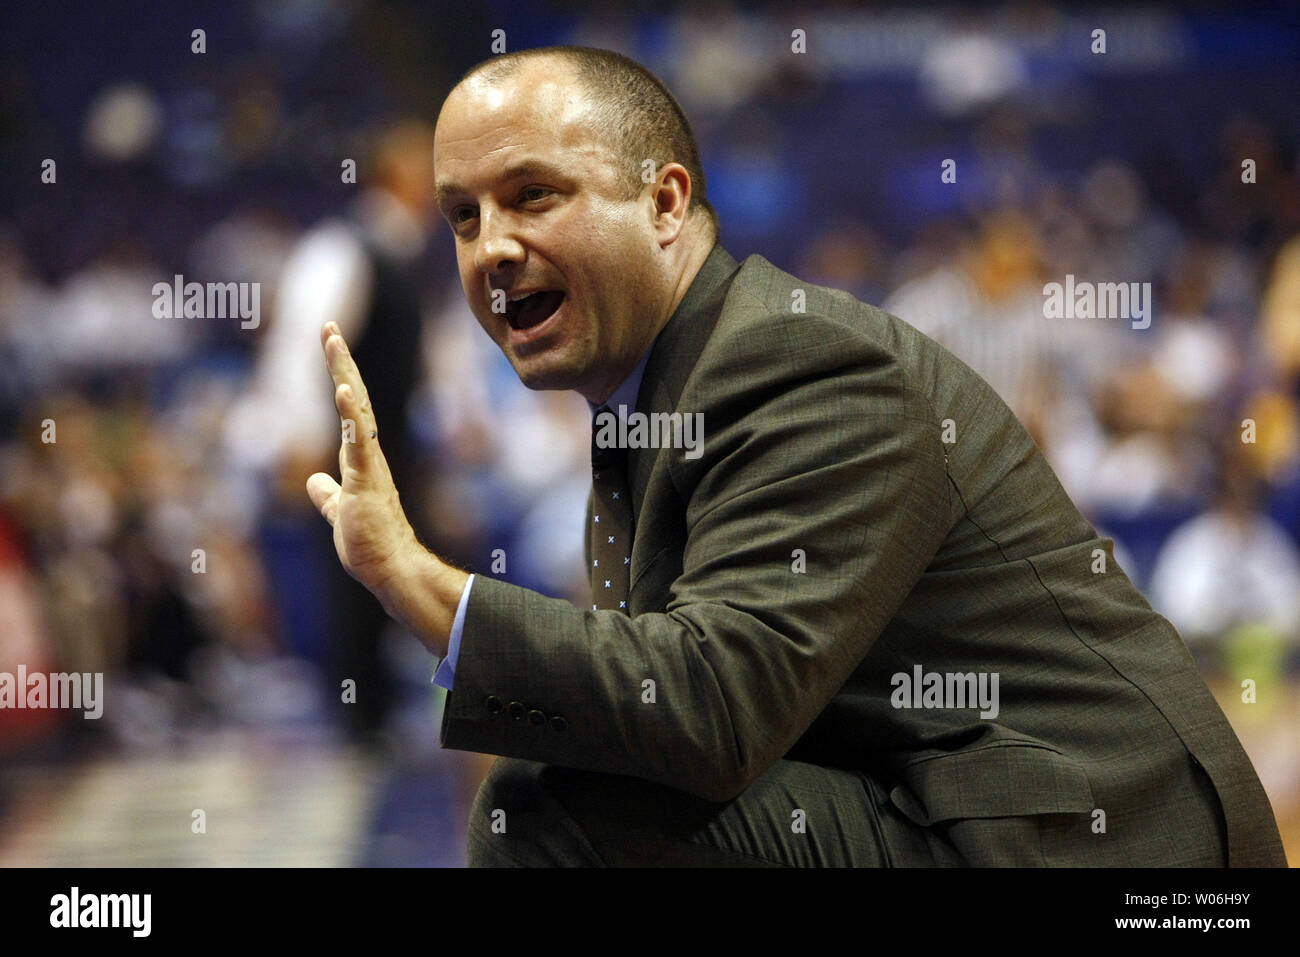 Drake Bulldogs head basketball coach Mark Phelps gives his team instructions during the first half of the opening round of the  Missouri Valley Tournament against the Indiana State Sycamores at the Scottrade Center in St. Louis on March 5, 2009.  (UPI Photo/Bill Greenblatt) Stock Photo